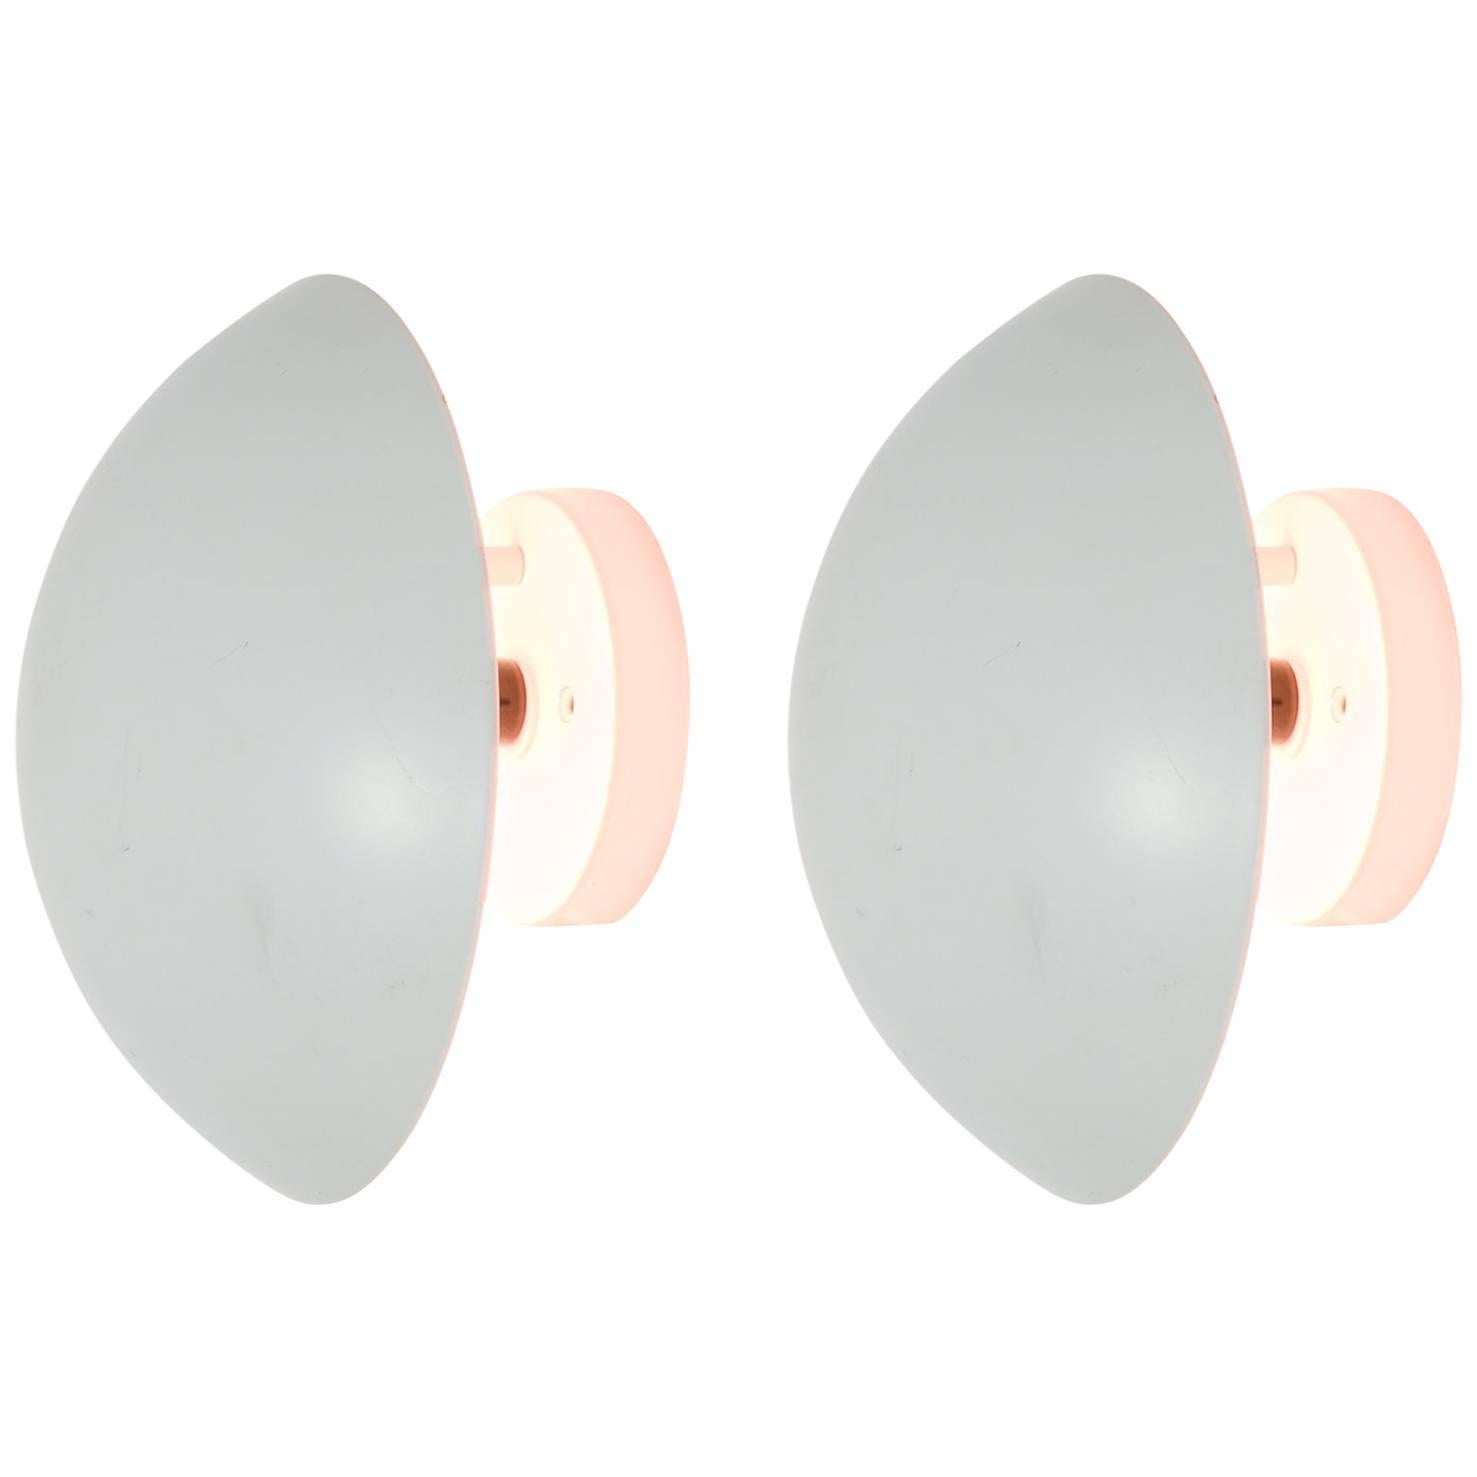 Pair of Articulating P-Hat Wall Sconces by Poul Henningsen for Louis Poulsen For Sale